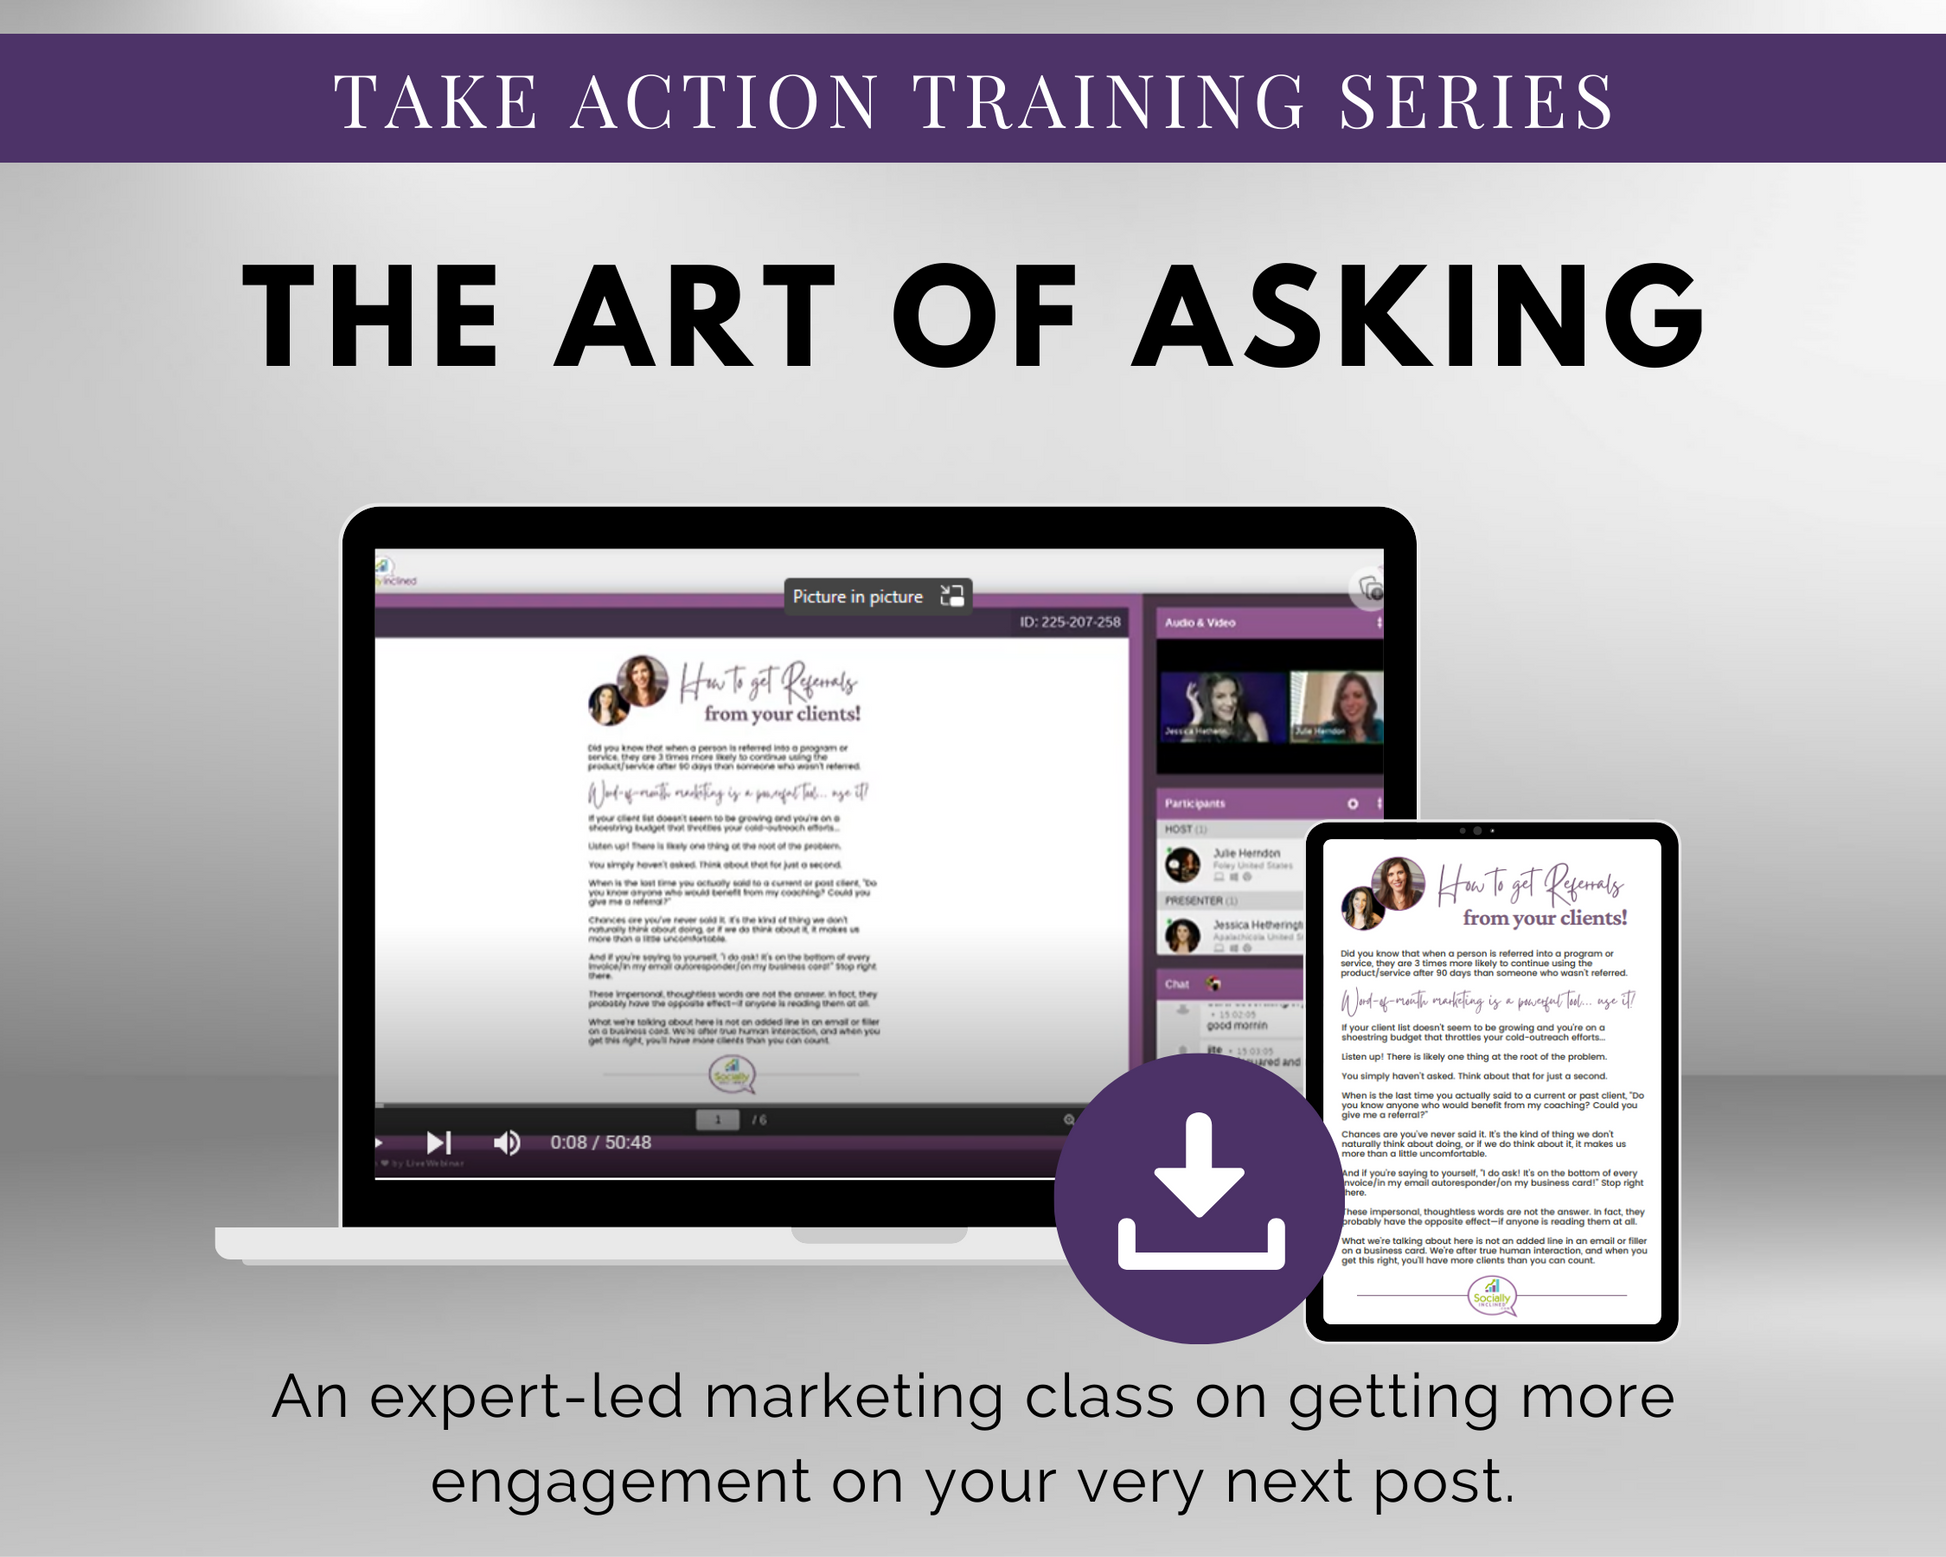 Take Get Socially Inclined's TAT - The Art of Asking Masterclass training series.